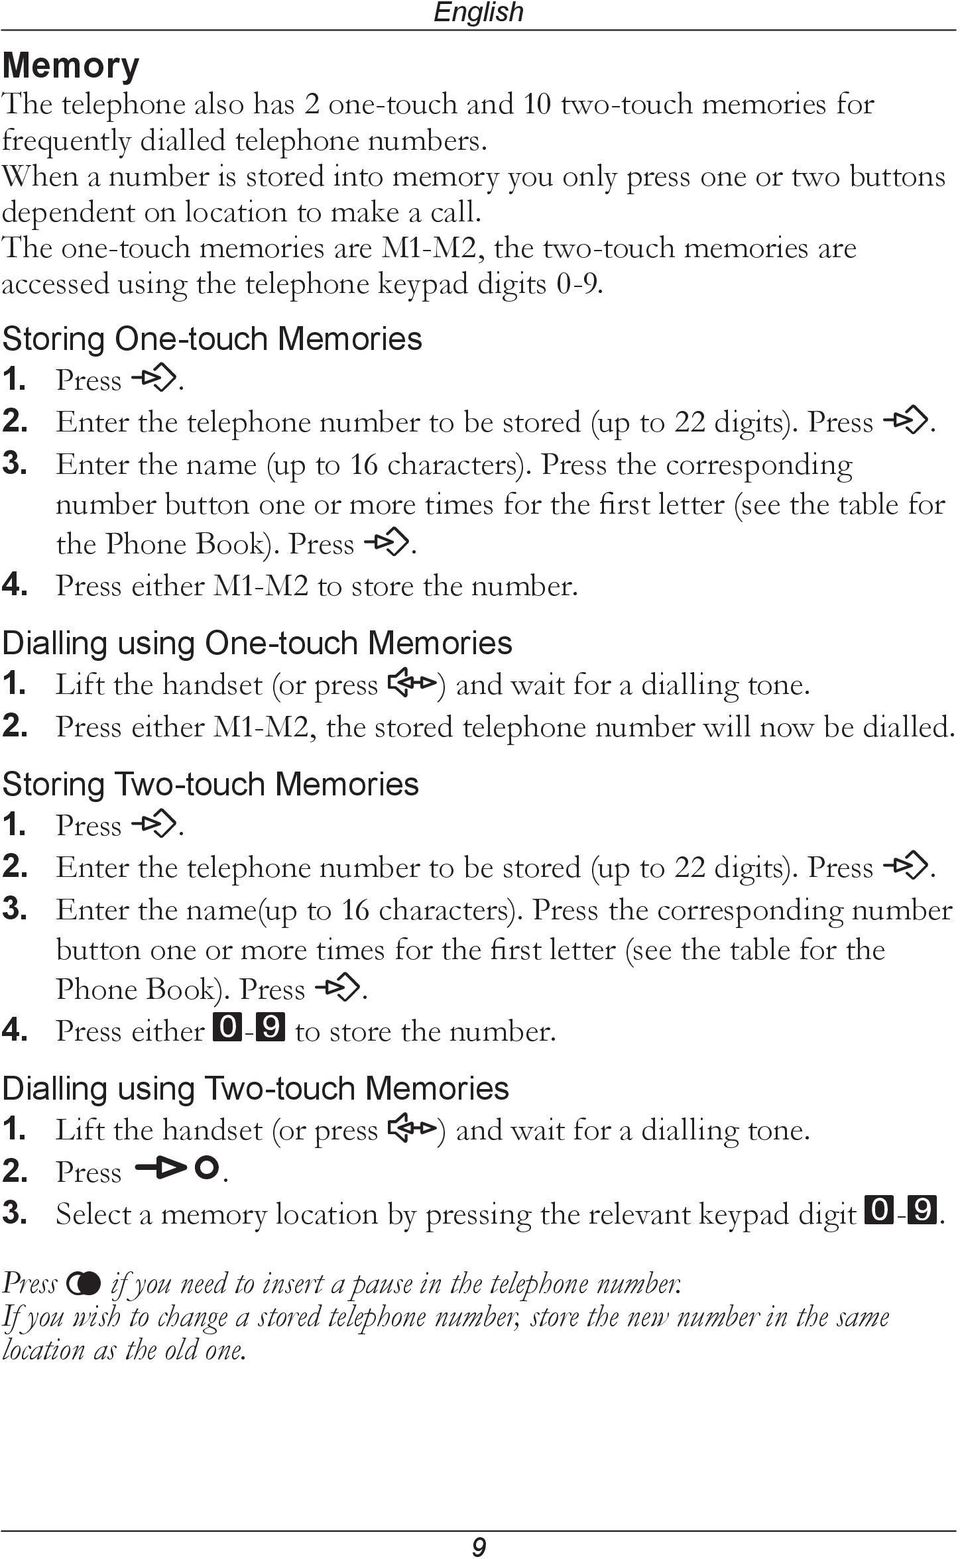 The one-touch memories are M1-M2, the two-touch memories are accessed using the telephone keypad digits 0-9. Storing One-touch Memories 1. Press P. 2.